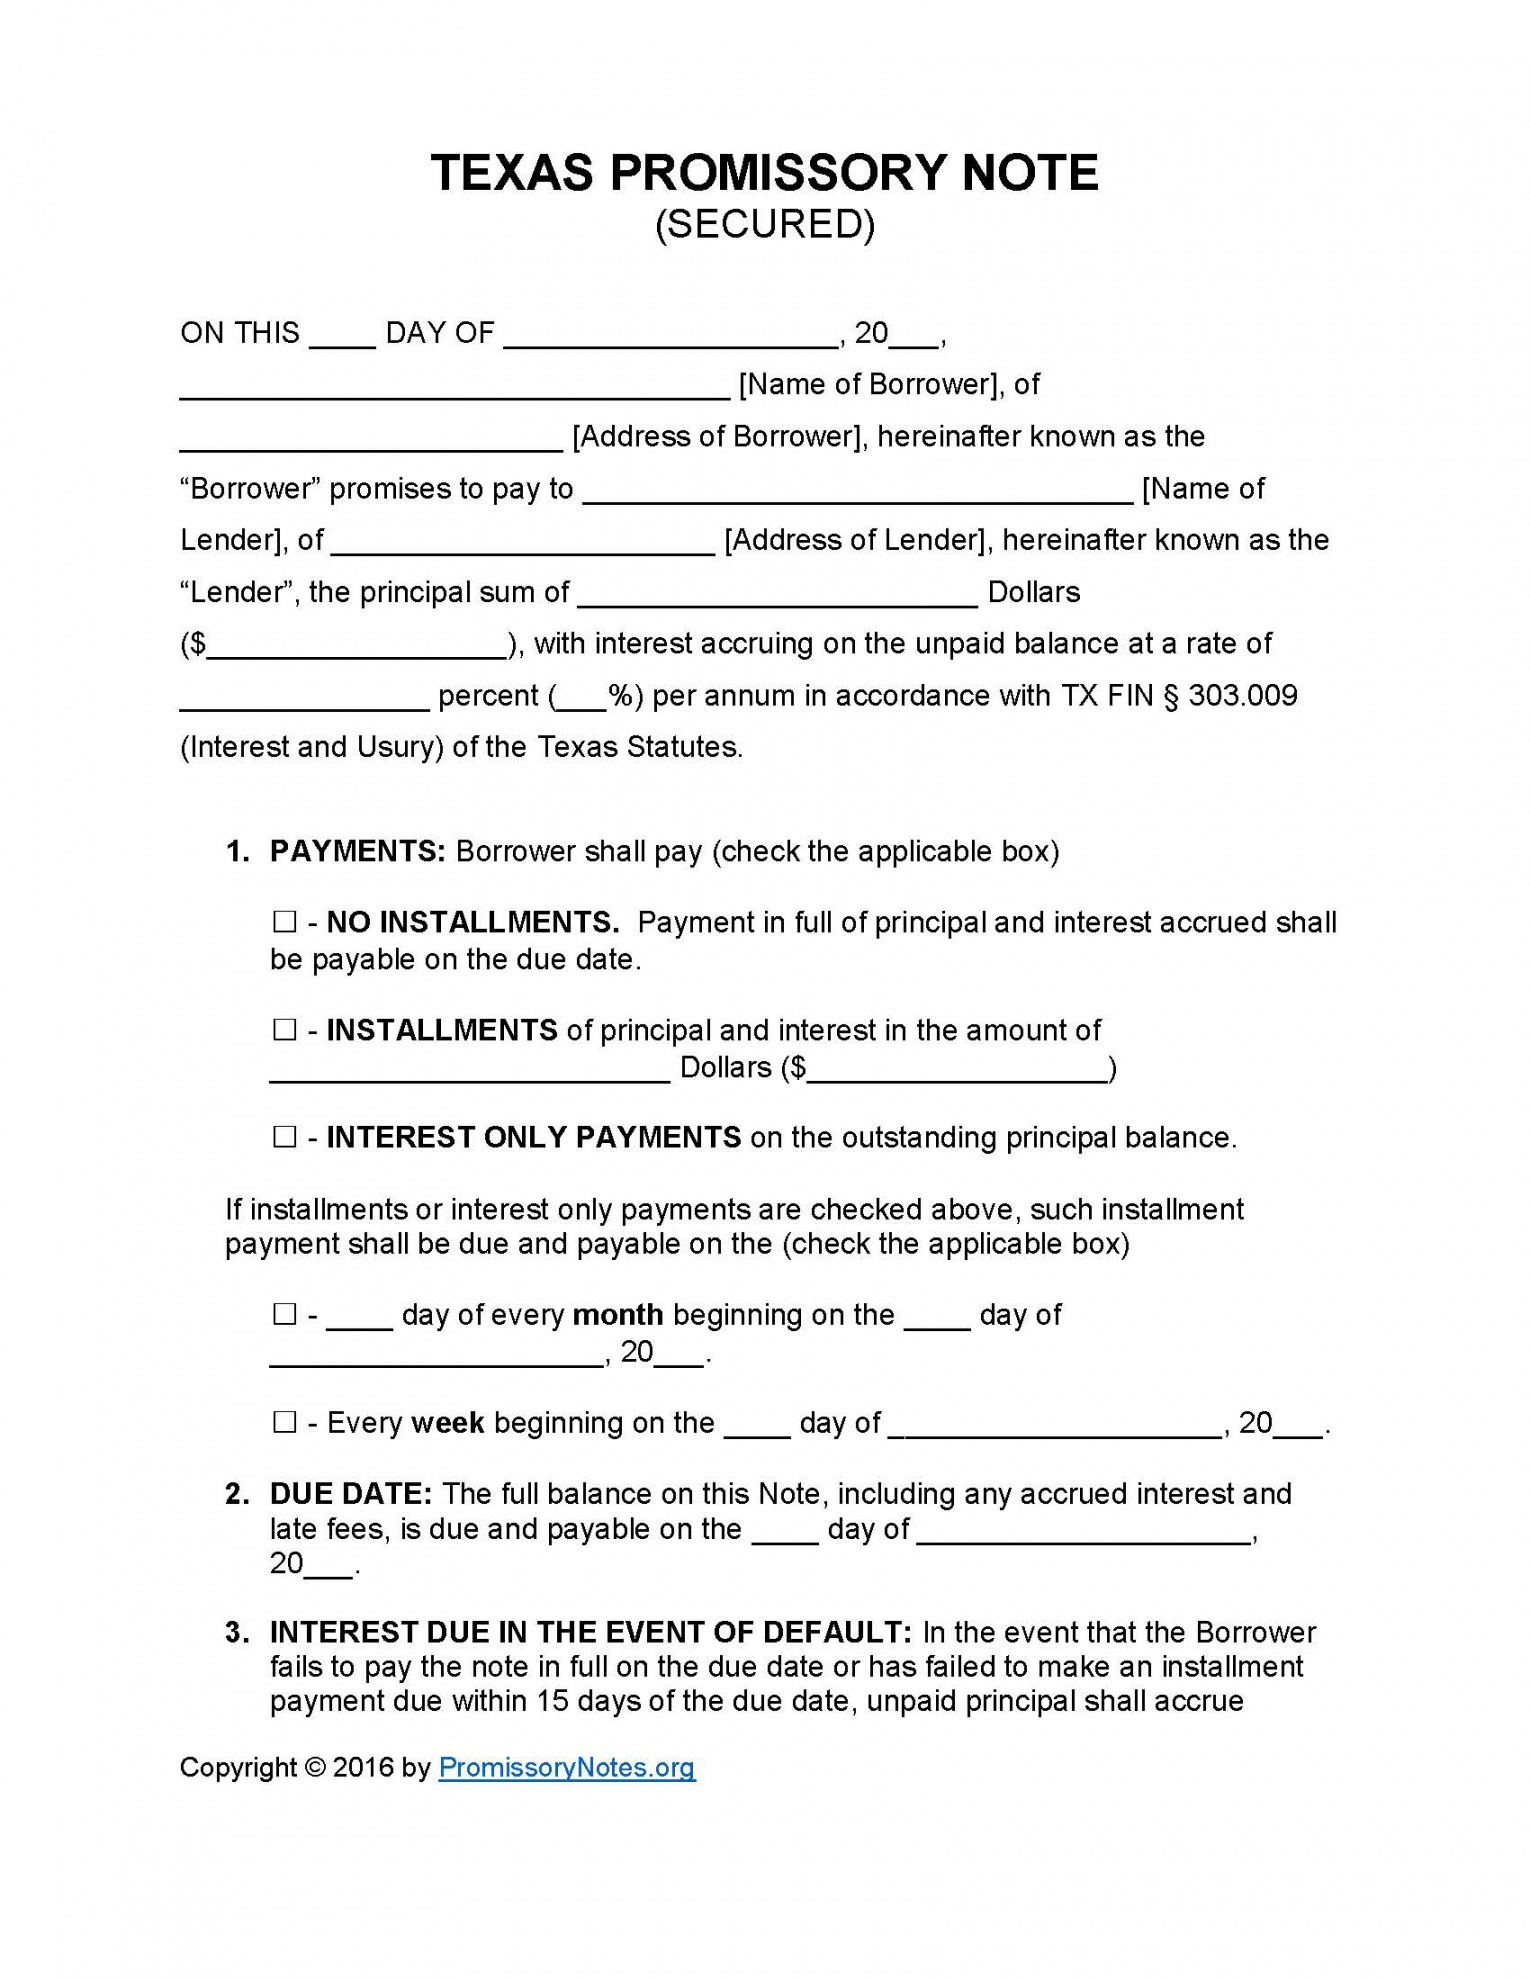 texas secured promissory note template  promissory notes texas promissory note template doc